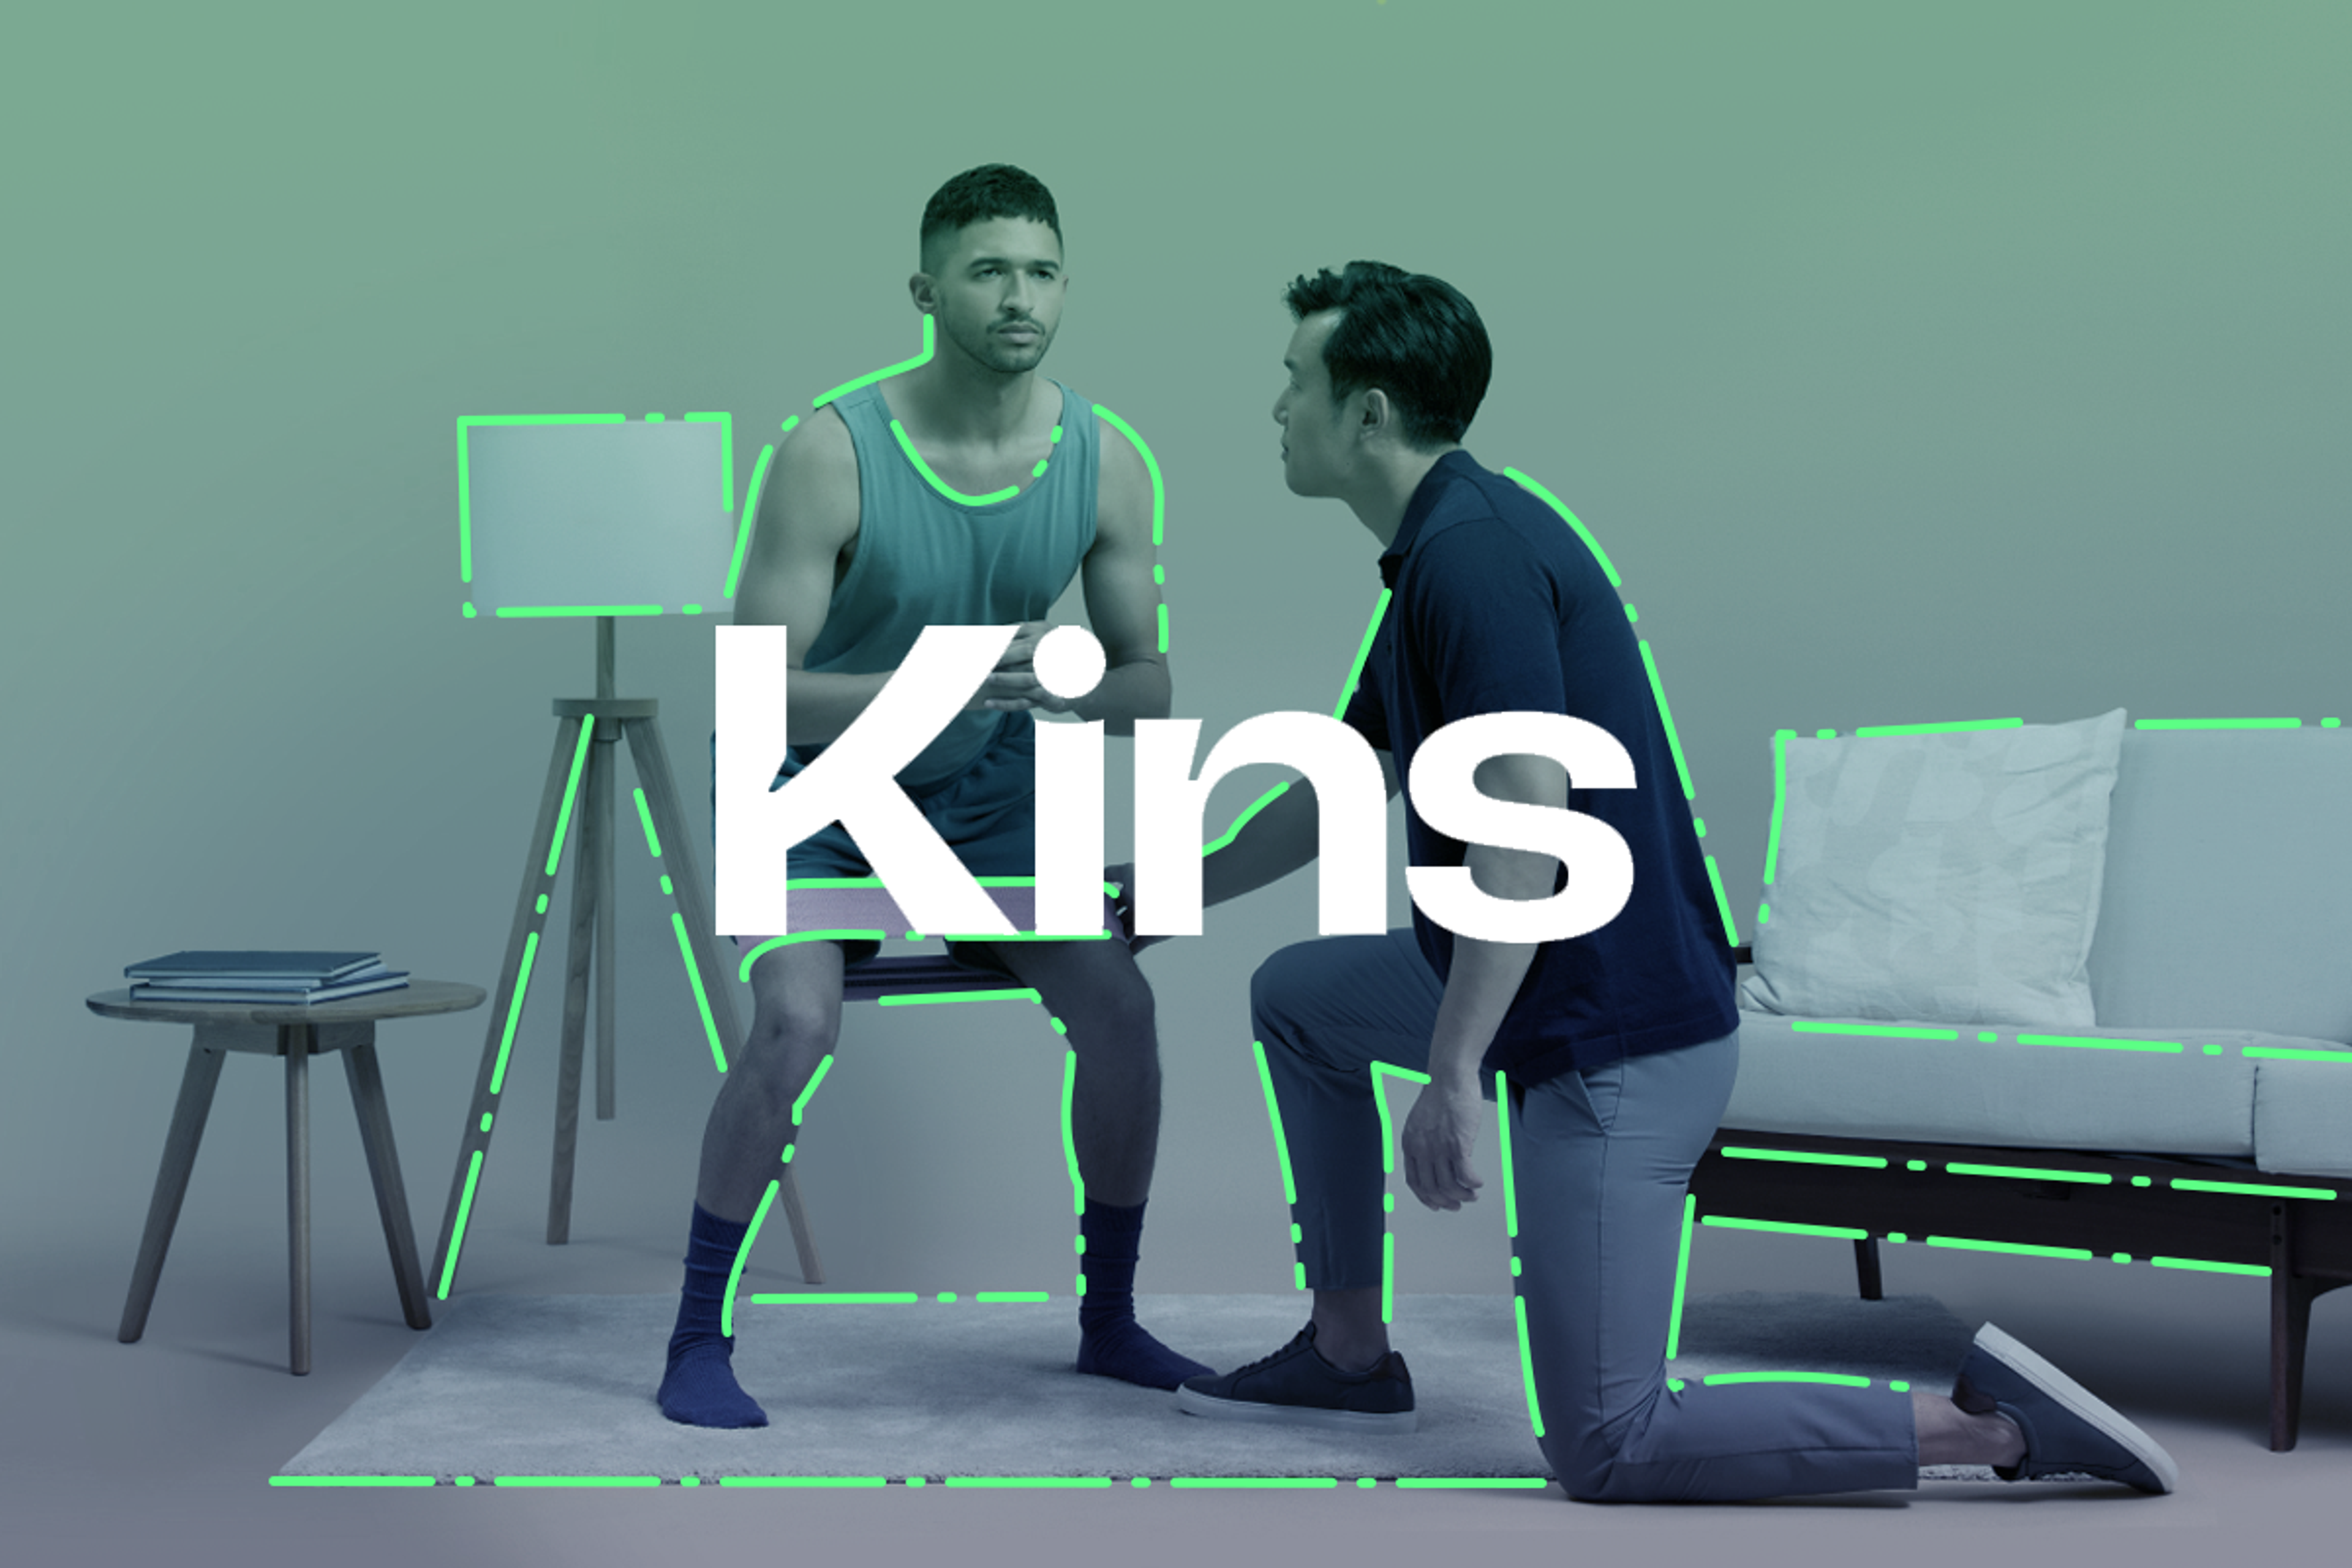 How Kins' 1-¼ Person Marketing Team Improves Conversion Rates Without an In-House Design Team